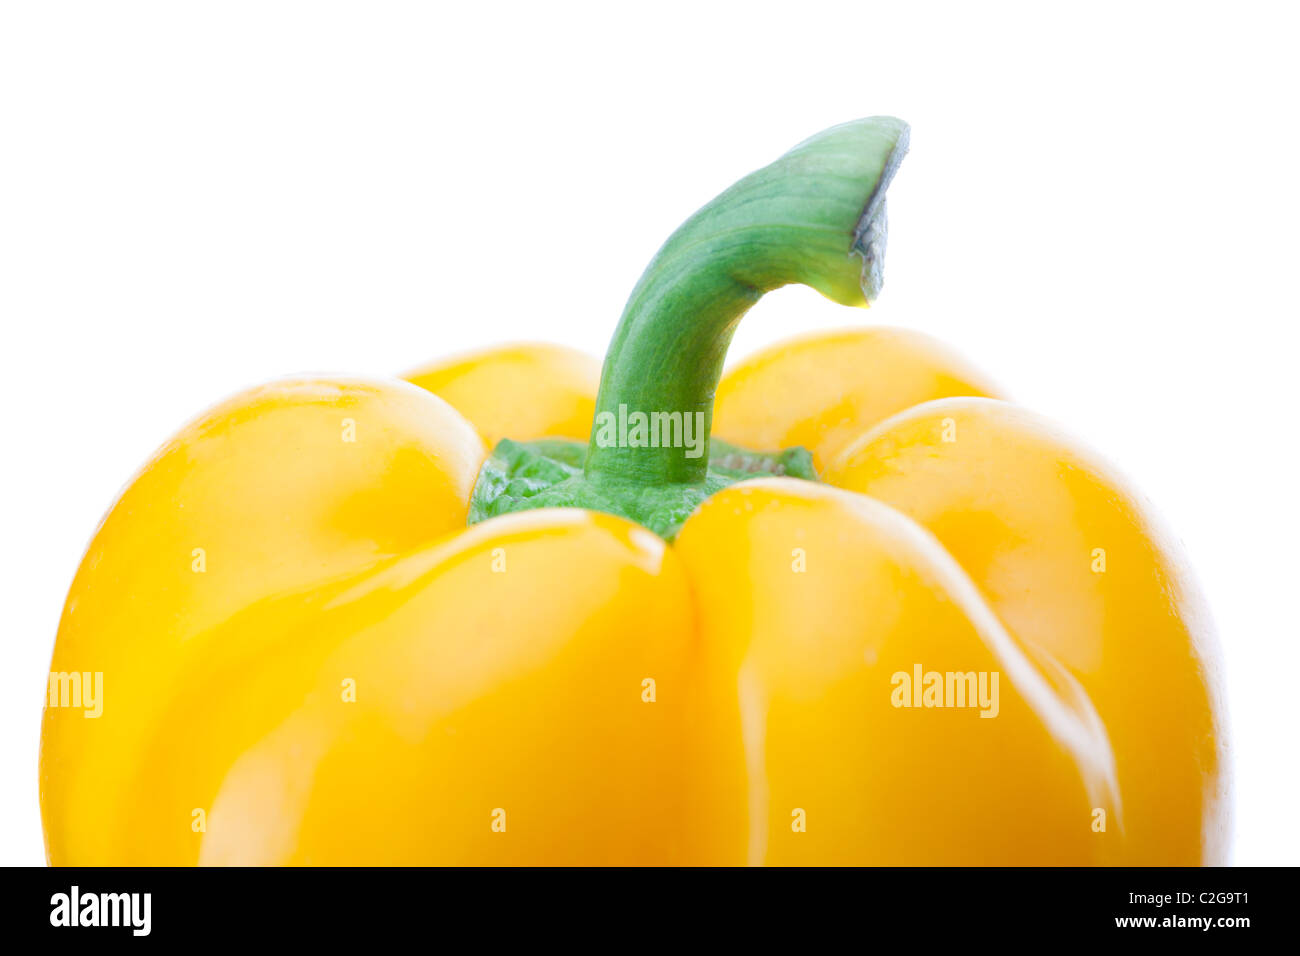 Isolated sweet yellow bell pepper (Capsicum annuum) on white background. Stock Photo